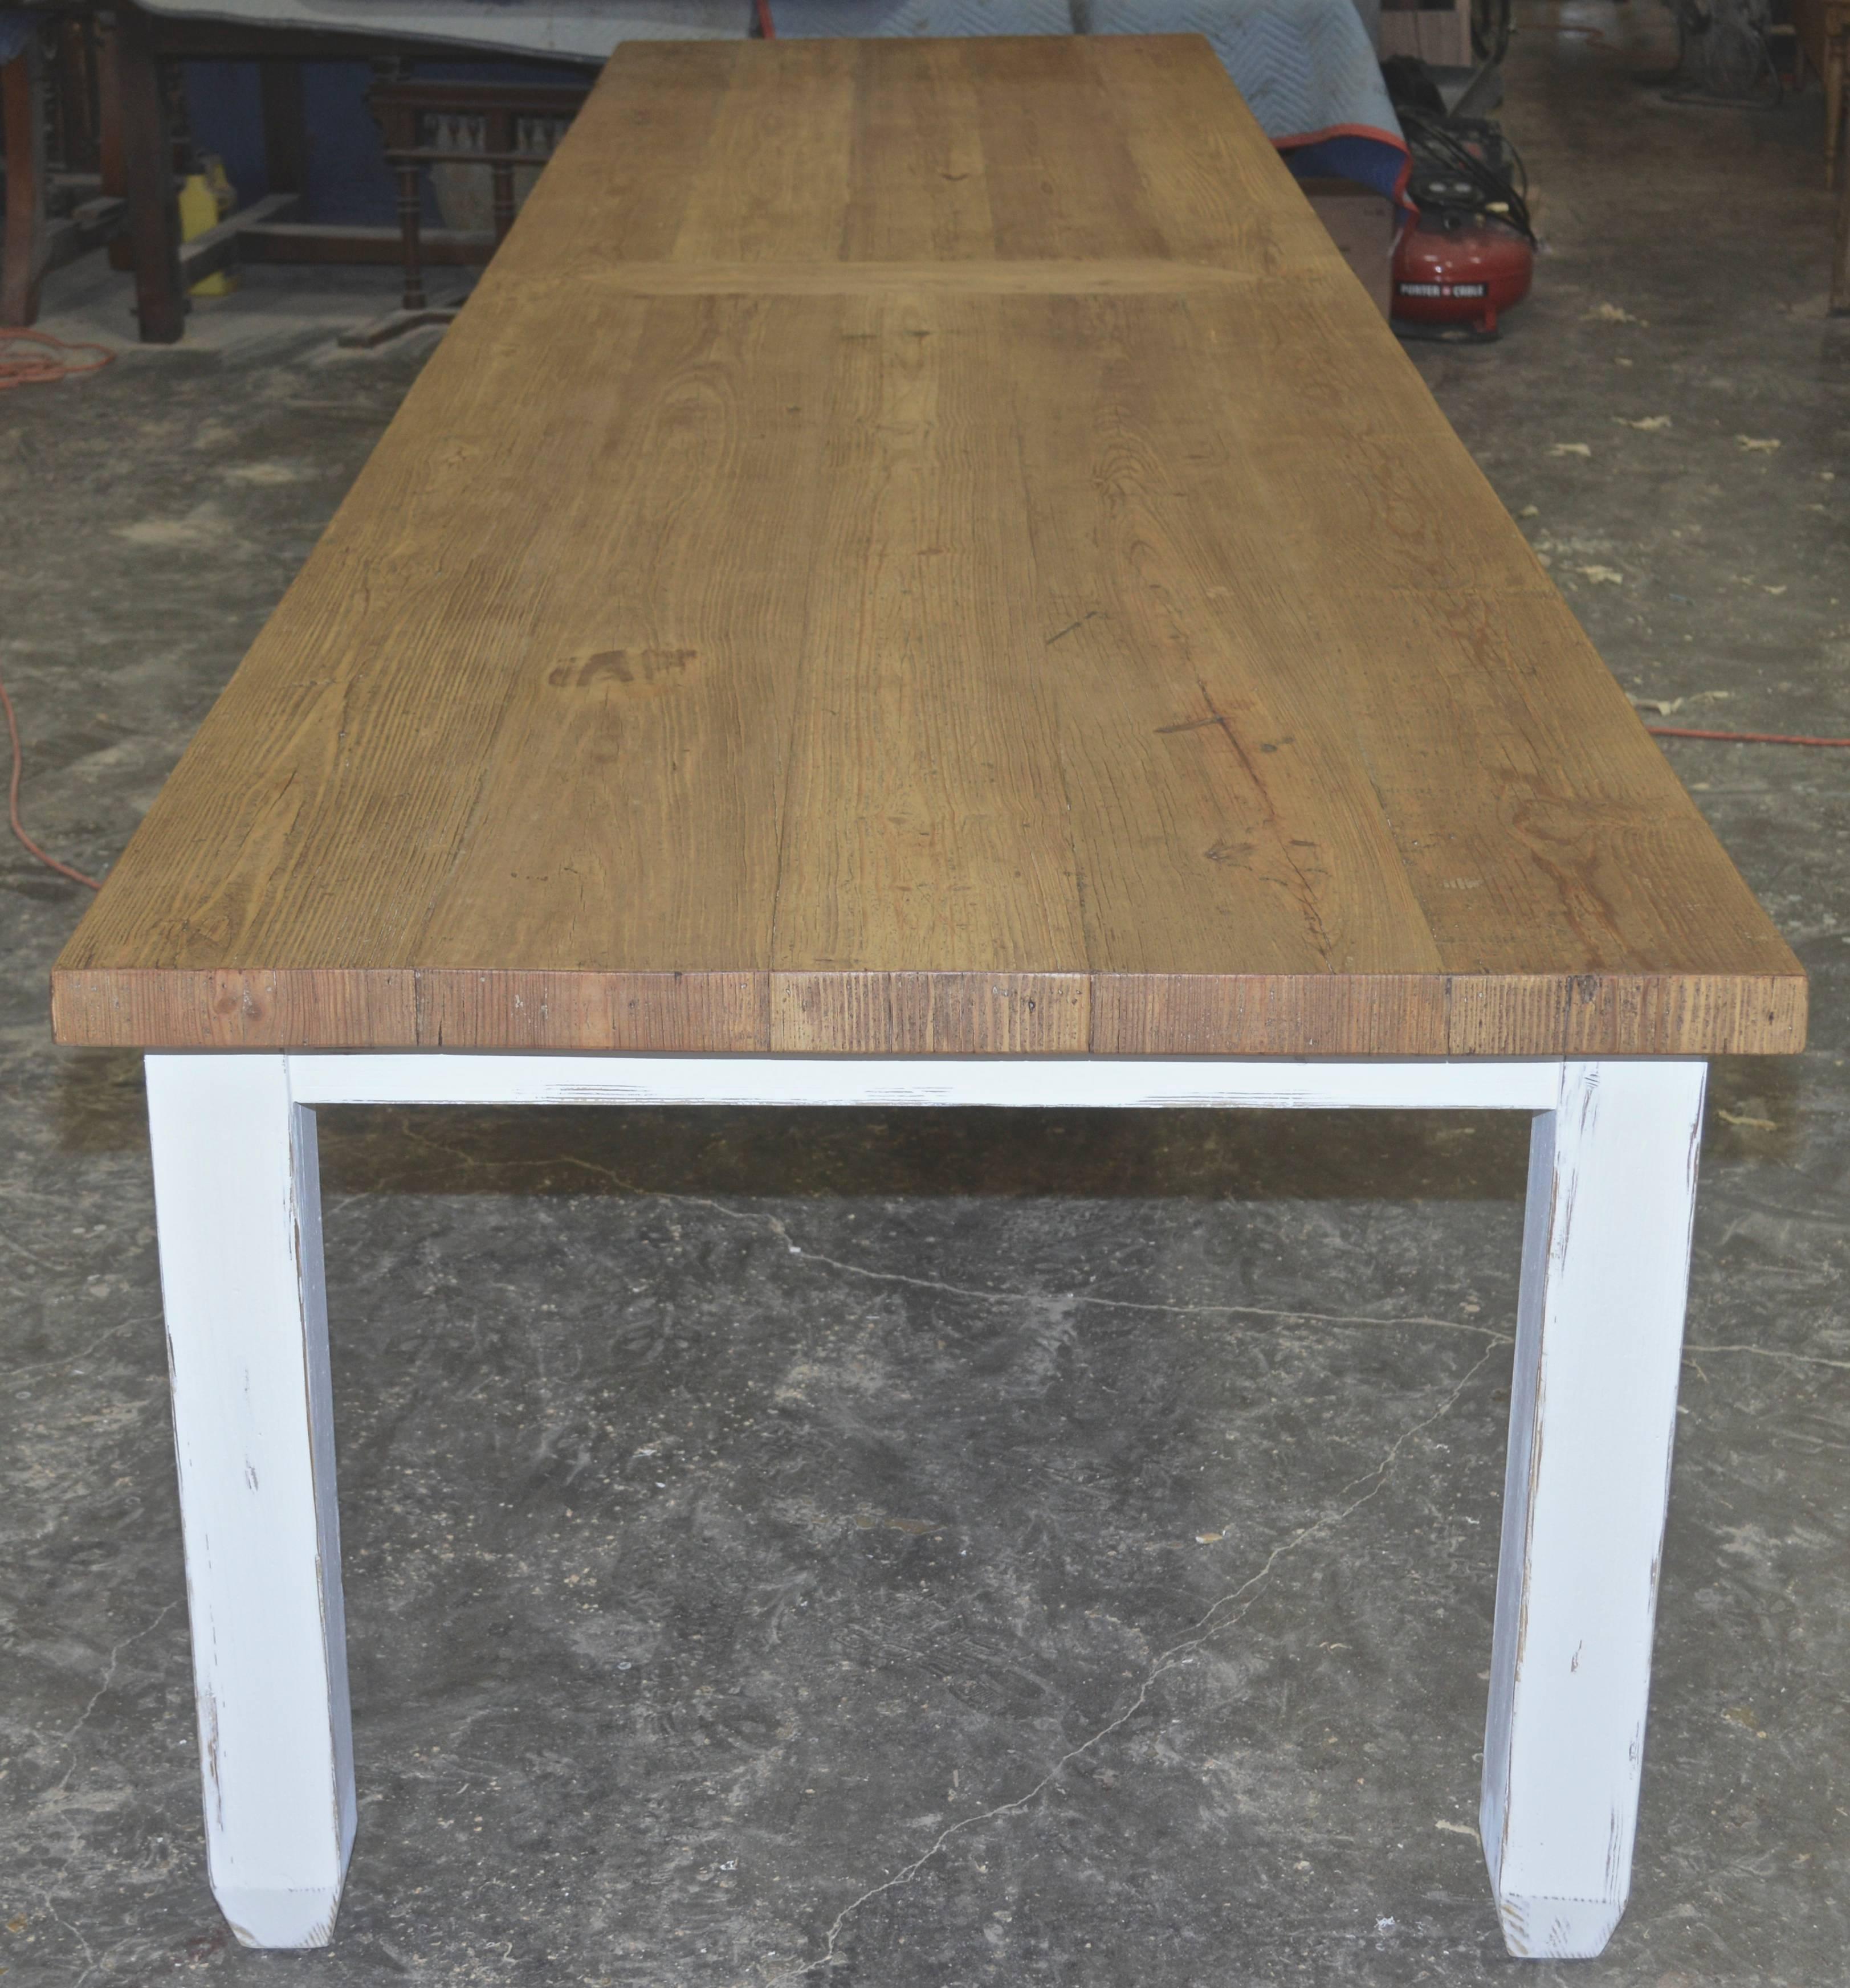 This long farm table is made entirely of reclaimed, vintage heart pine and hand selected for its beautiful patina and character. This table is 13 feet long, but can be ordered in almost any size.

Because each table is bench-made in our own Los